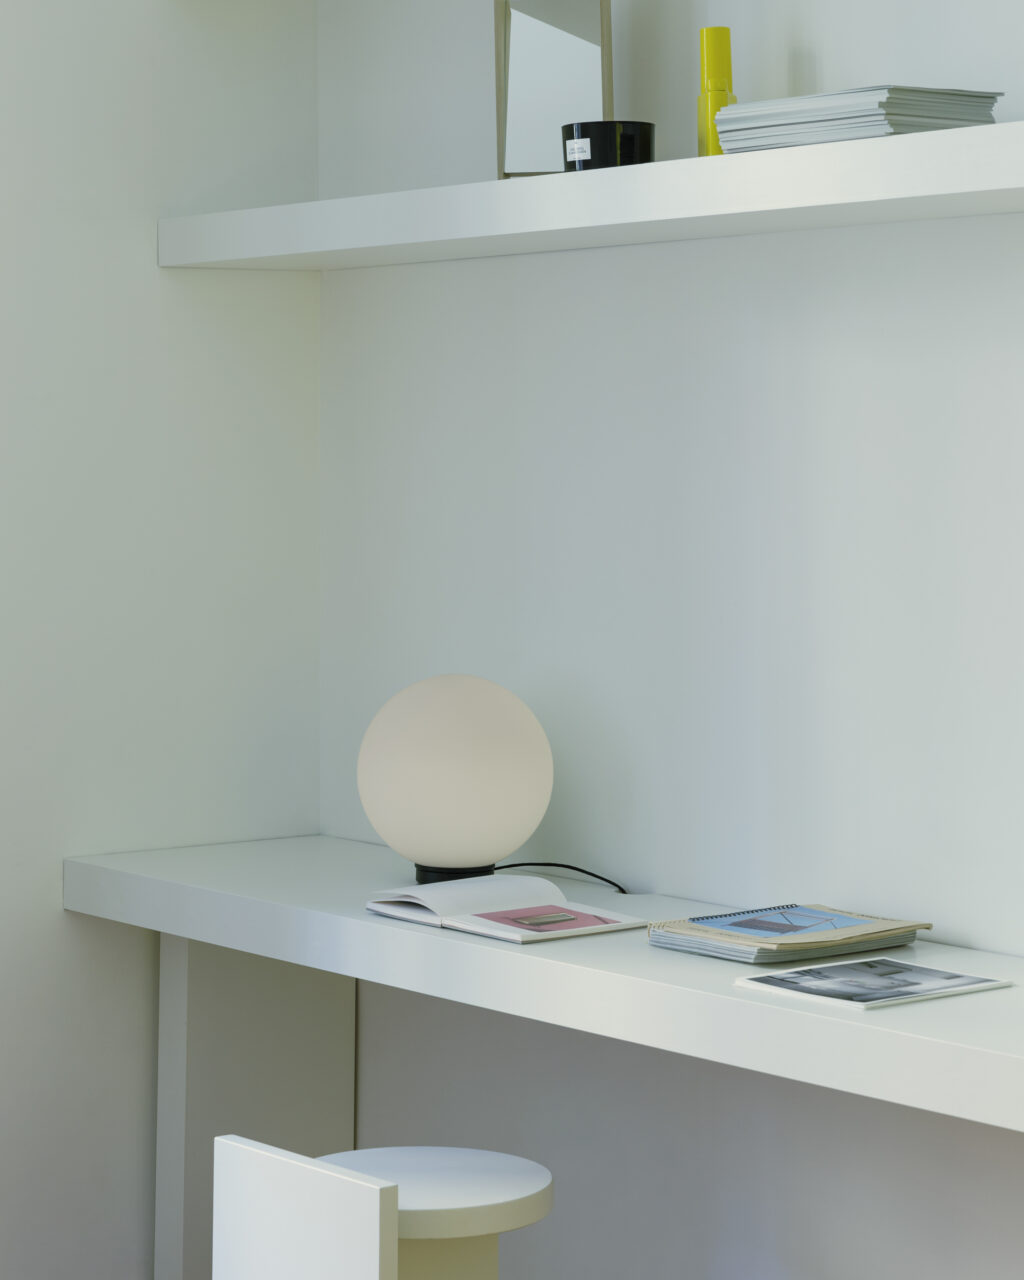 A desk and shelf in a white room